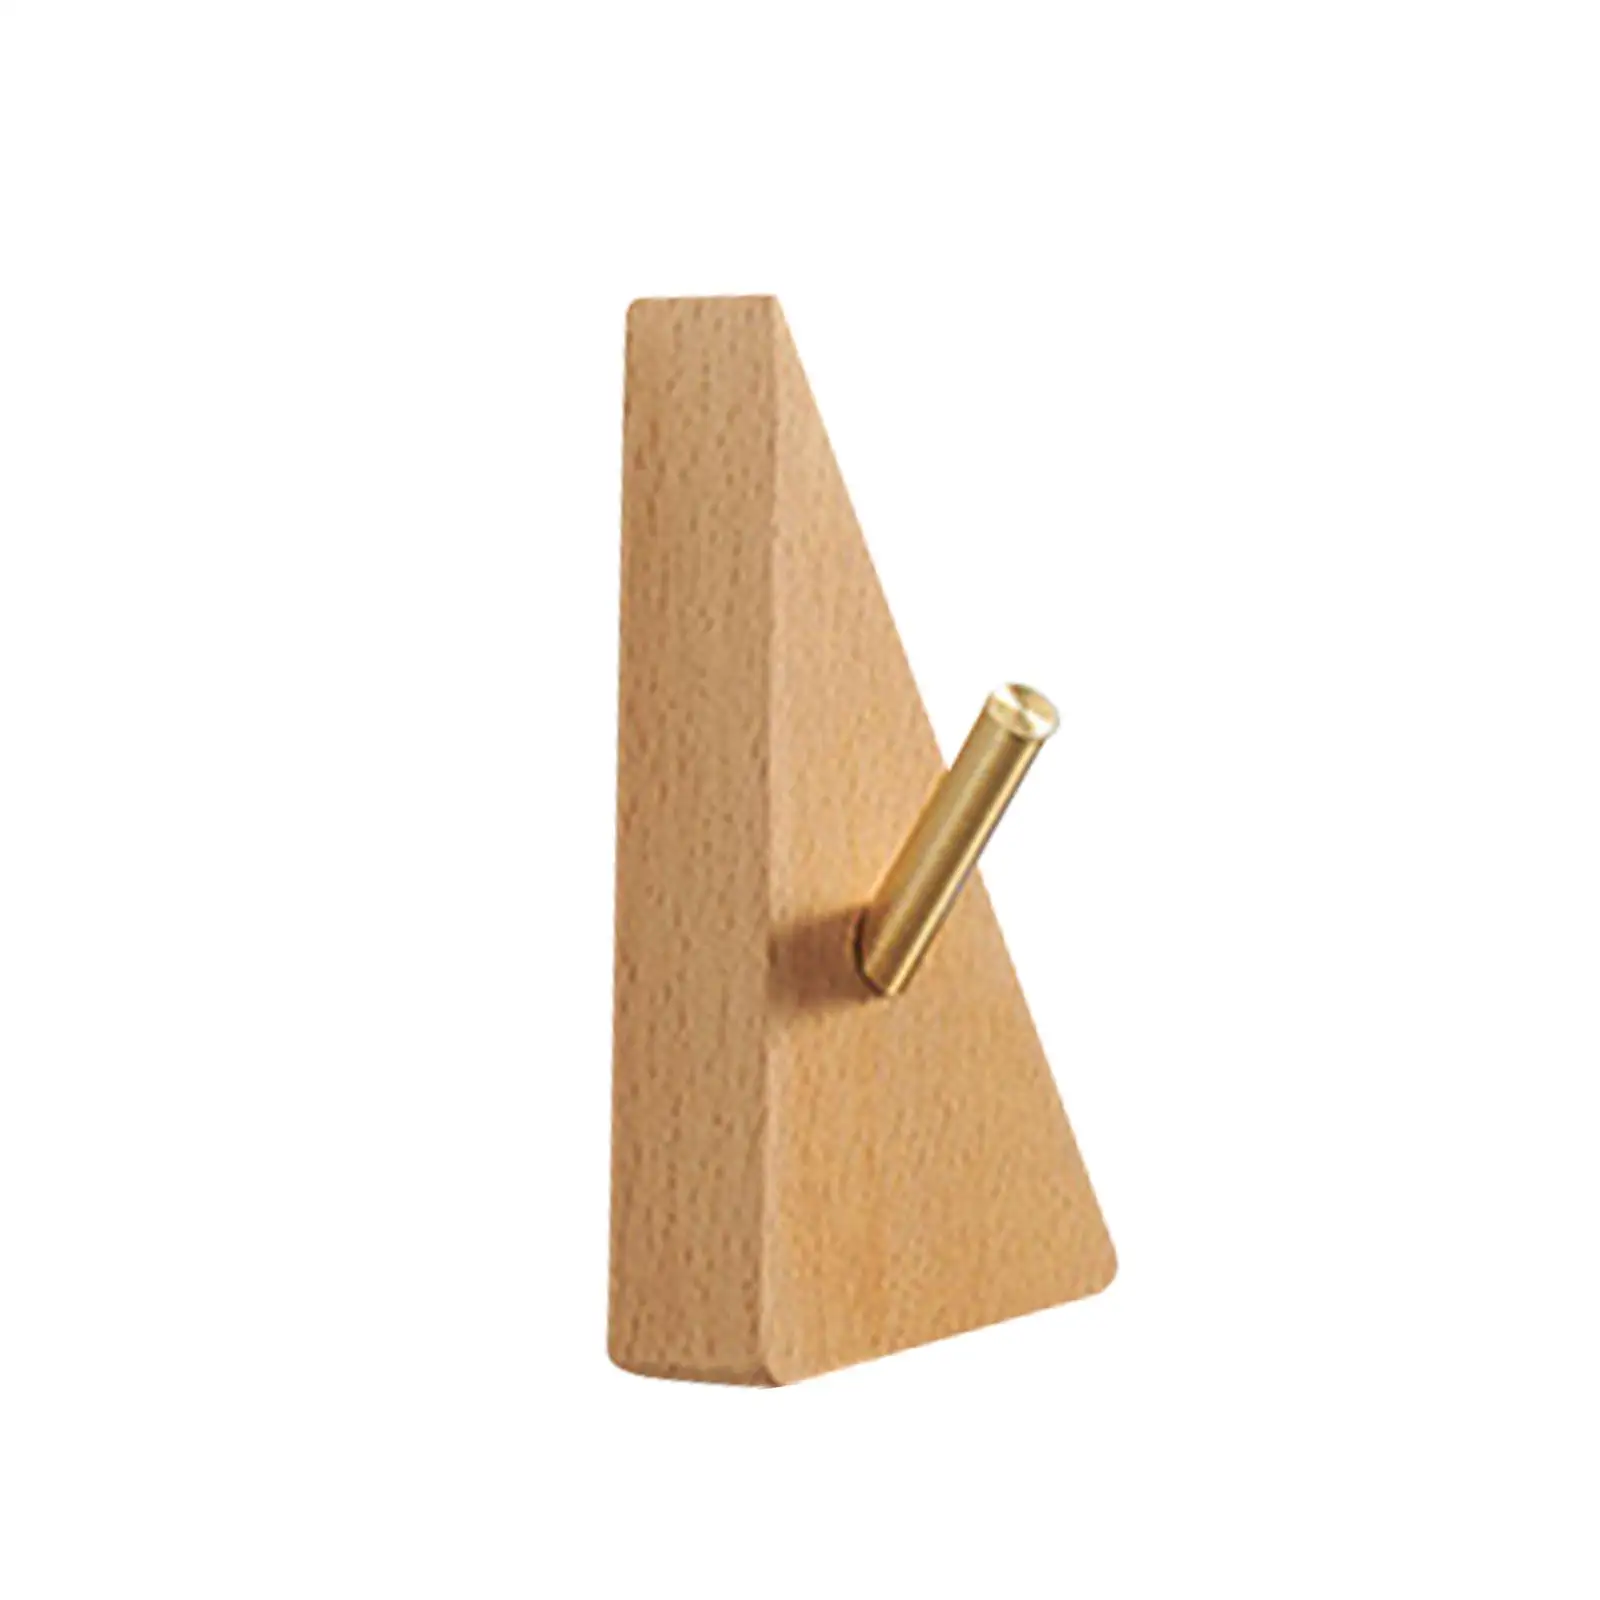 Triangle Hooks Wood Punch Free Multipurpose Wall Rack Holder Coat Clothes Towel Hook for Door Entryway Purse Living Room Home